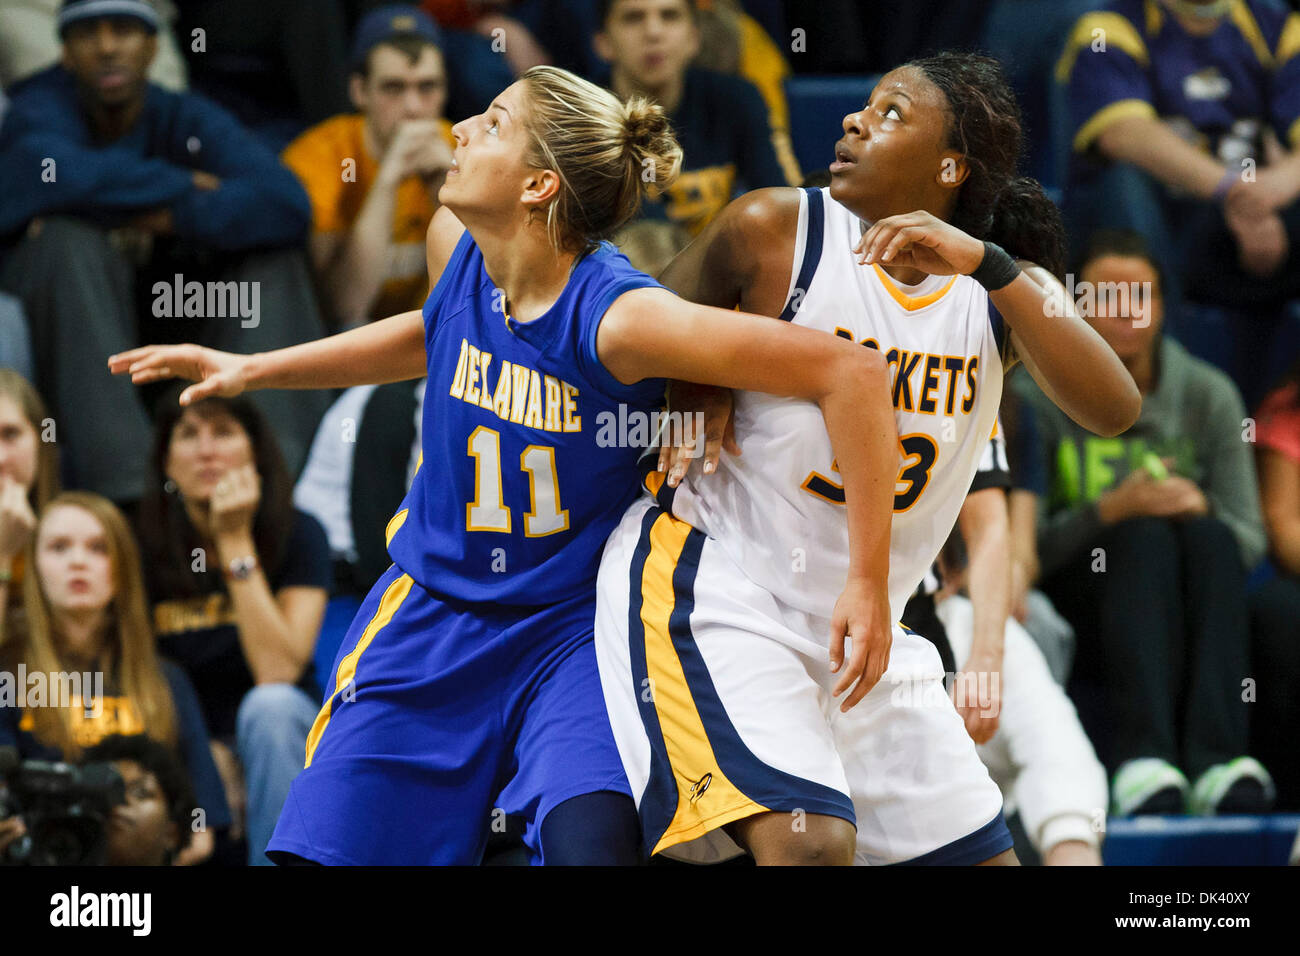 Mar. 16, 2011 - Toledo, Ohio, U.S - Toledo center Yolanda Richardson (#33) and Delaware forward Elena Delle Donne (#11) battle for rebounding position during second-half game action.  The Toledo Rockets, of the Mid-American Conference, defeated the Delaware Blue Hens, of the Colonial Athletic Association, 58-55 in the first round game of the 2011 Women's National Invitational Tourn Stock Photo